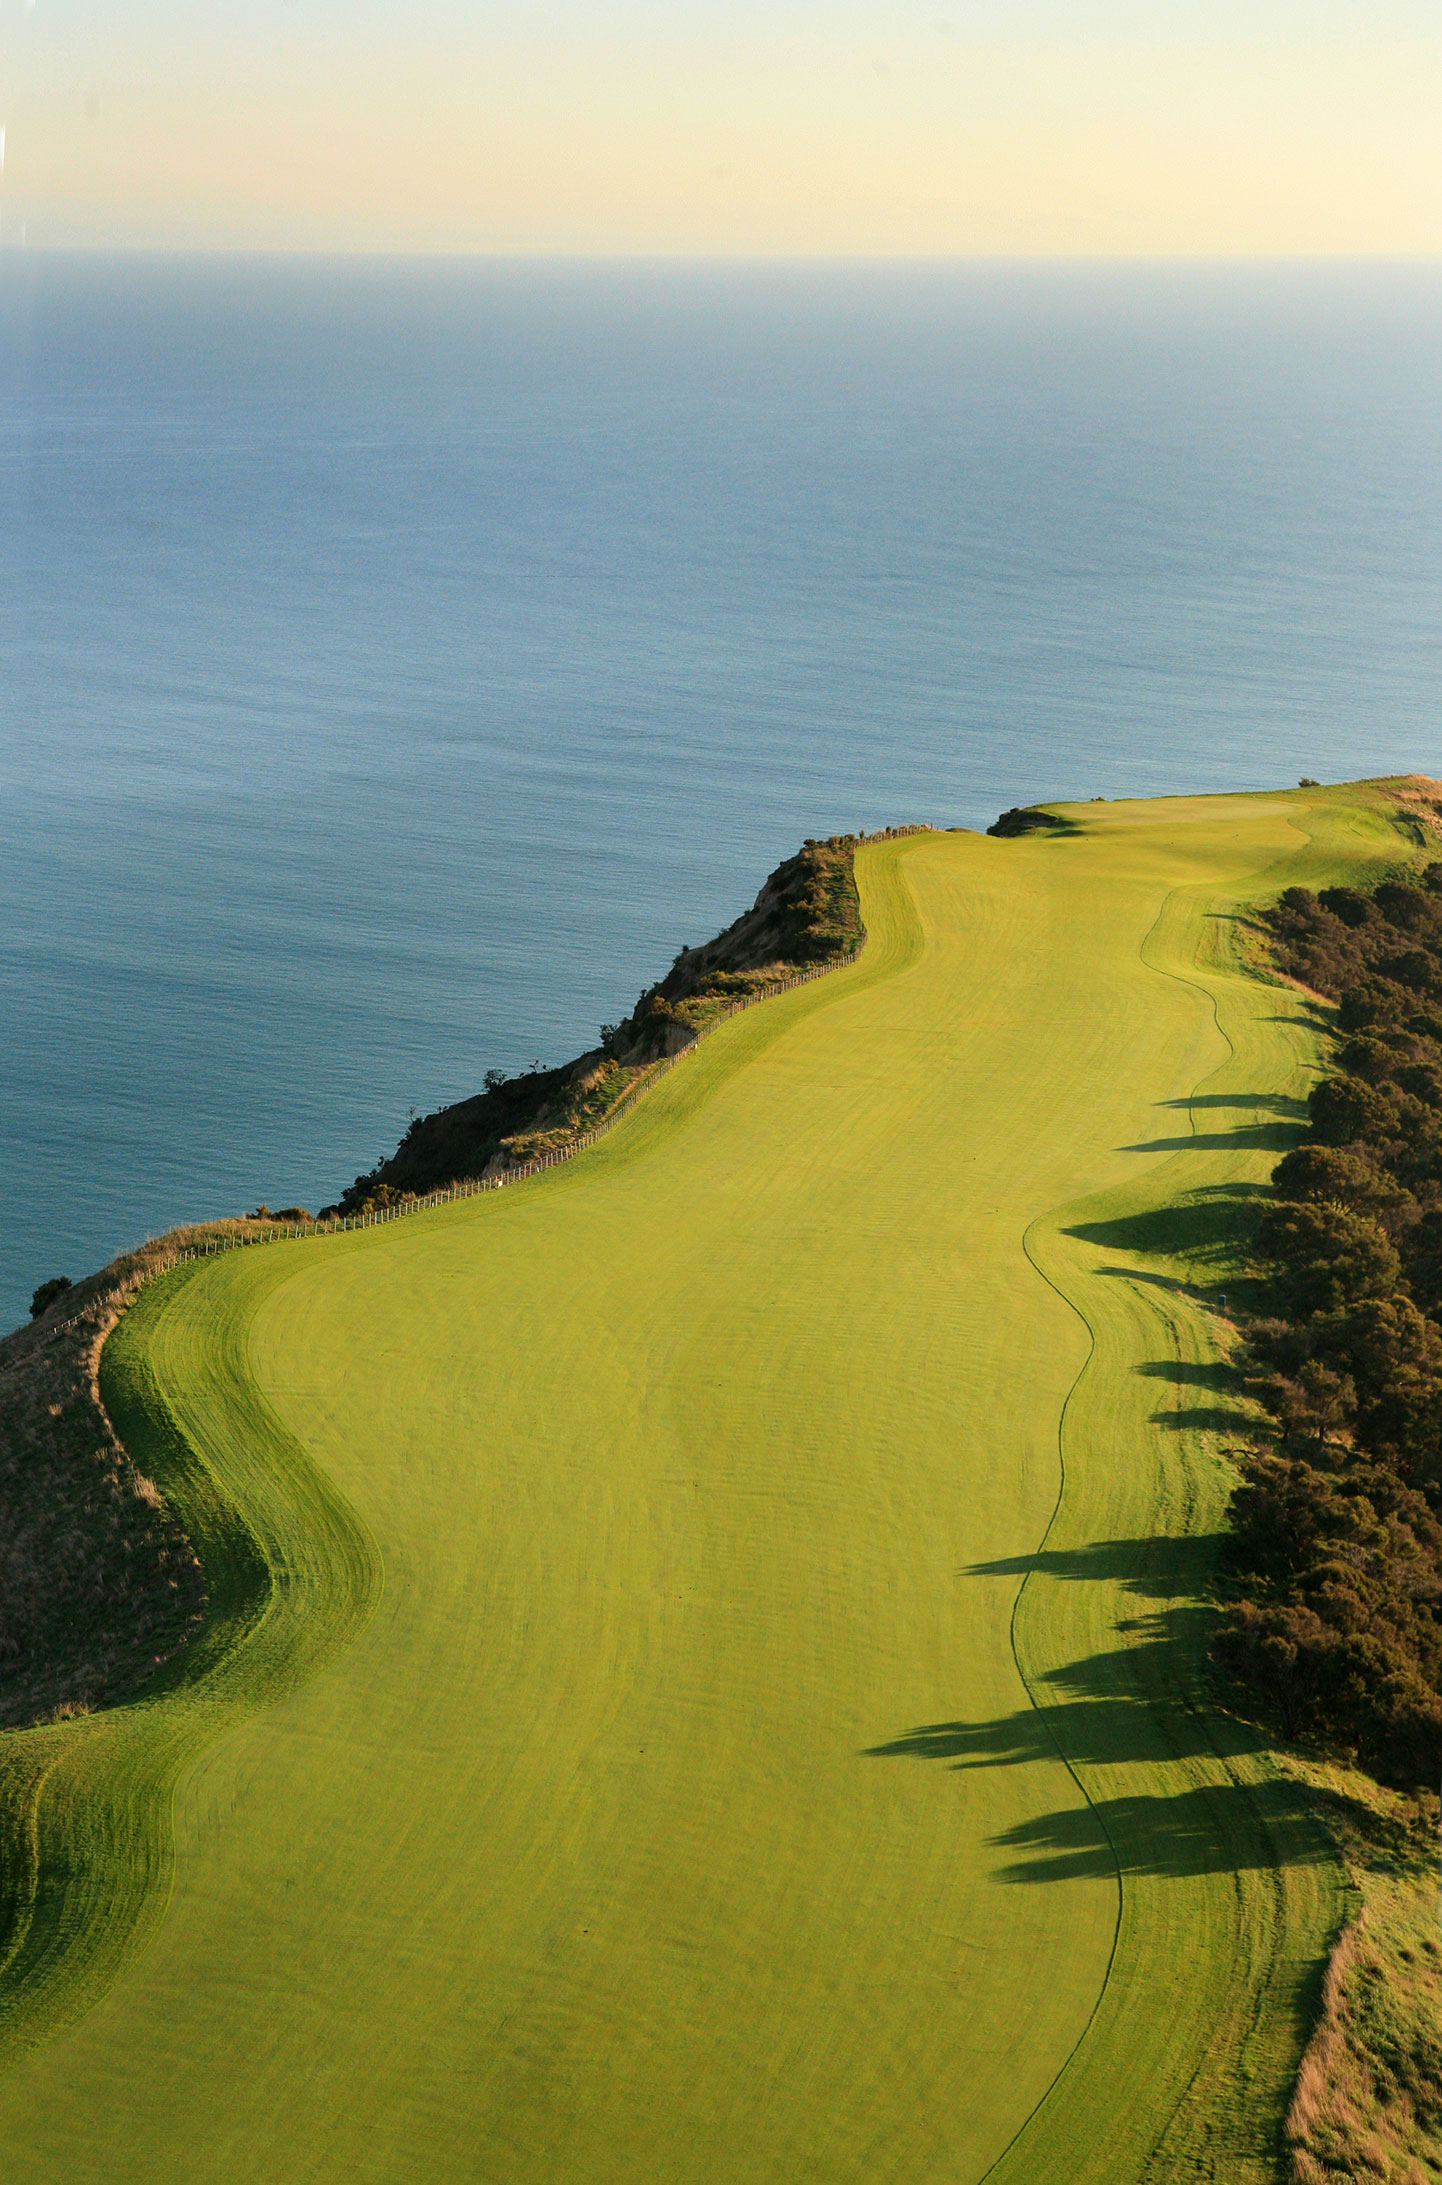 Adam Scott has called the 15th at Cape Kidnappers "one of the best par 5s in world golf." Gary Lisbon